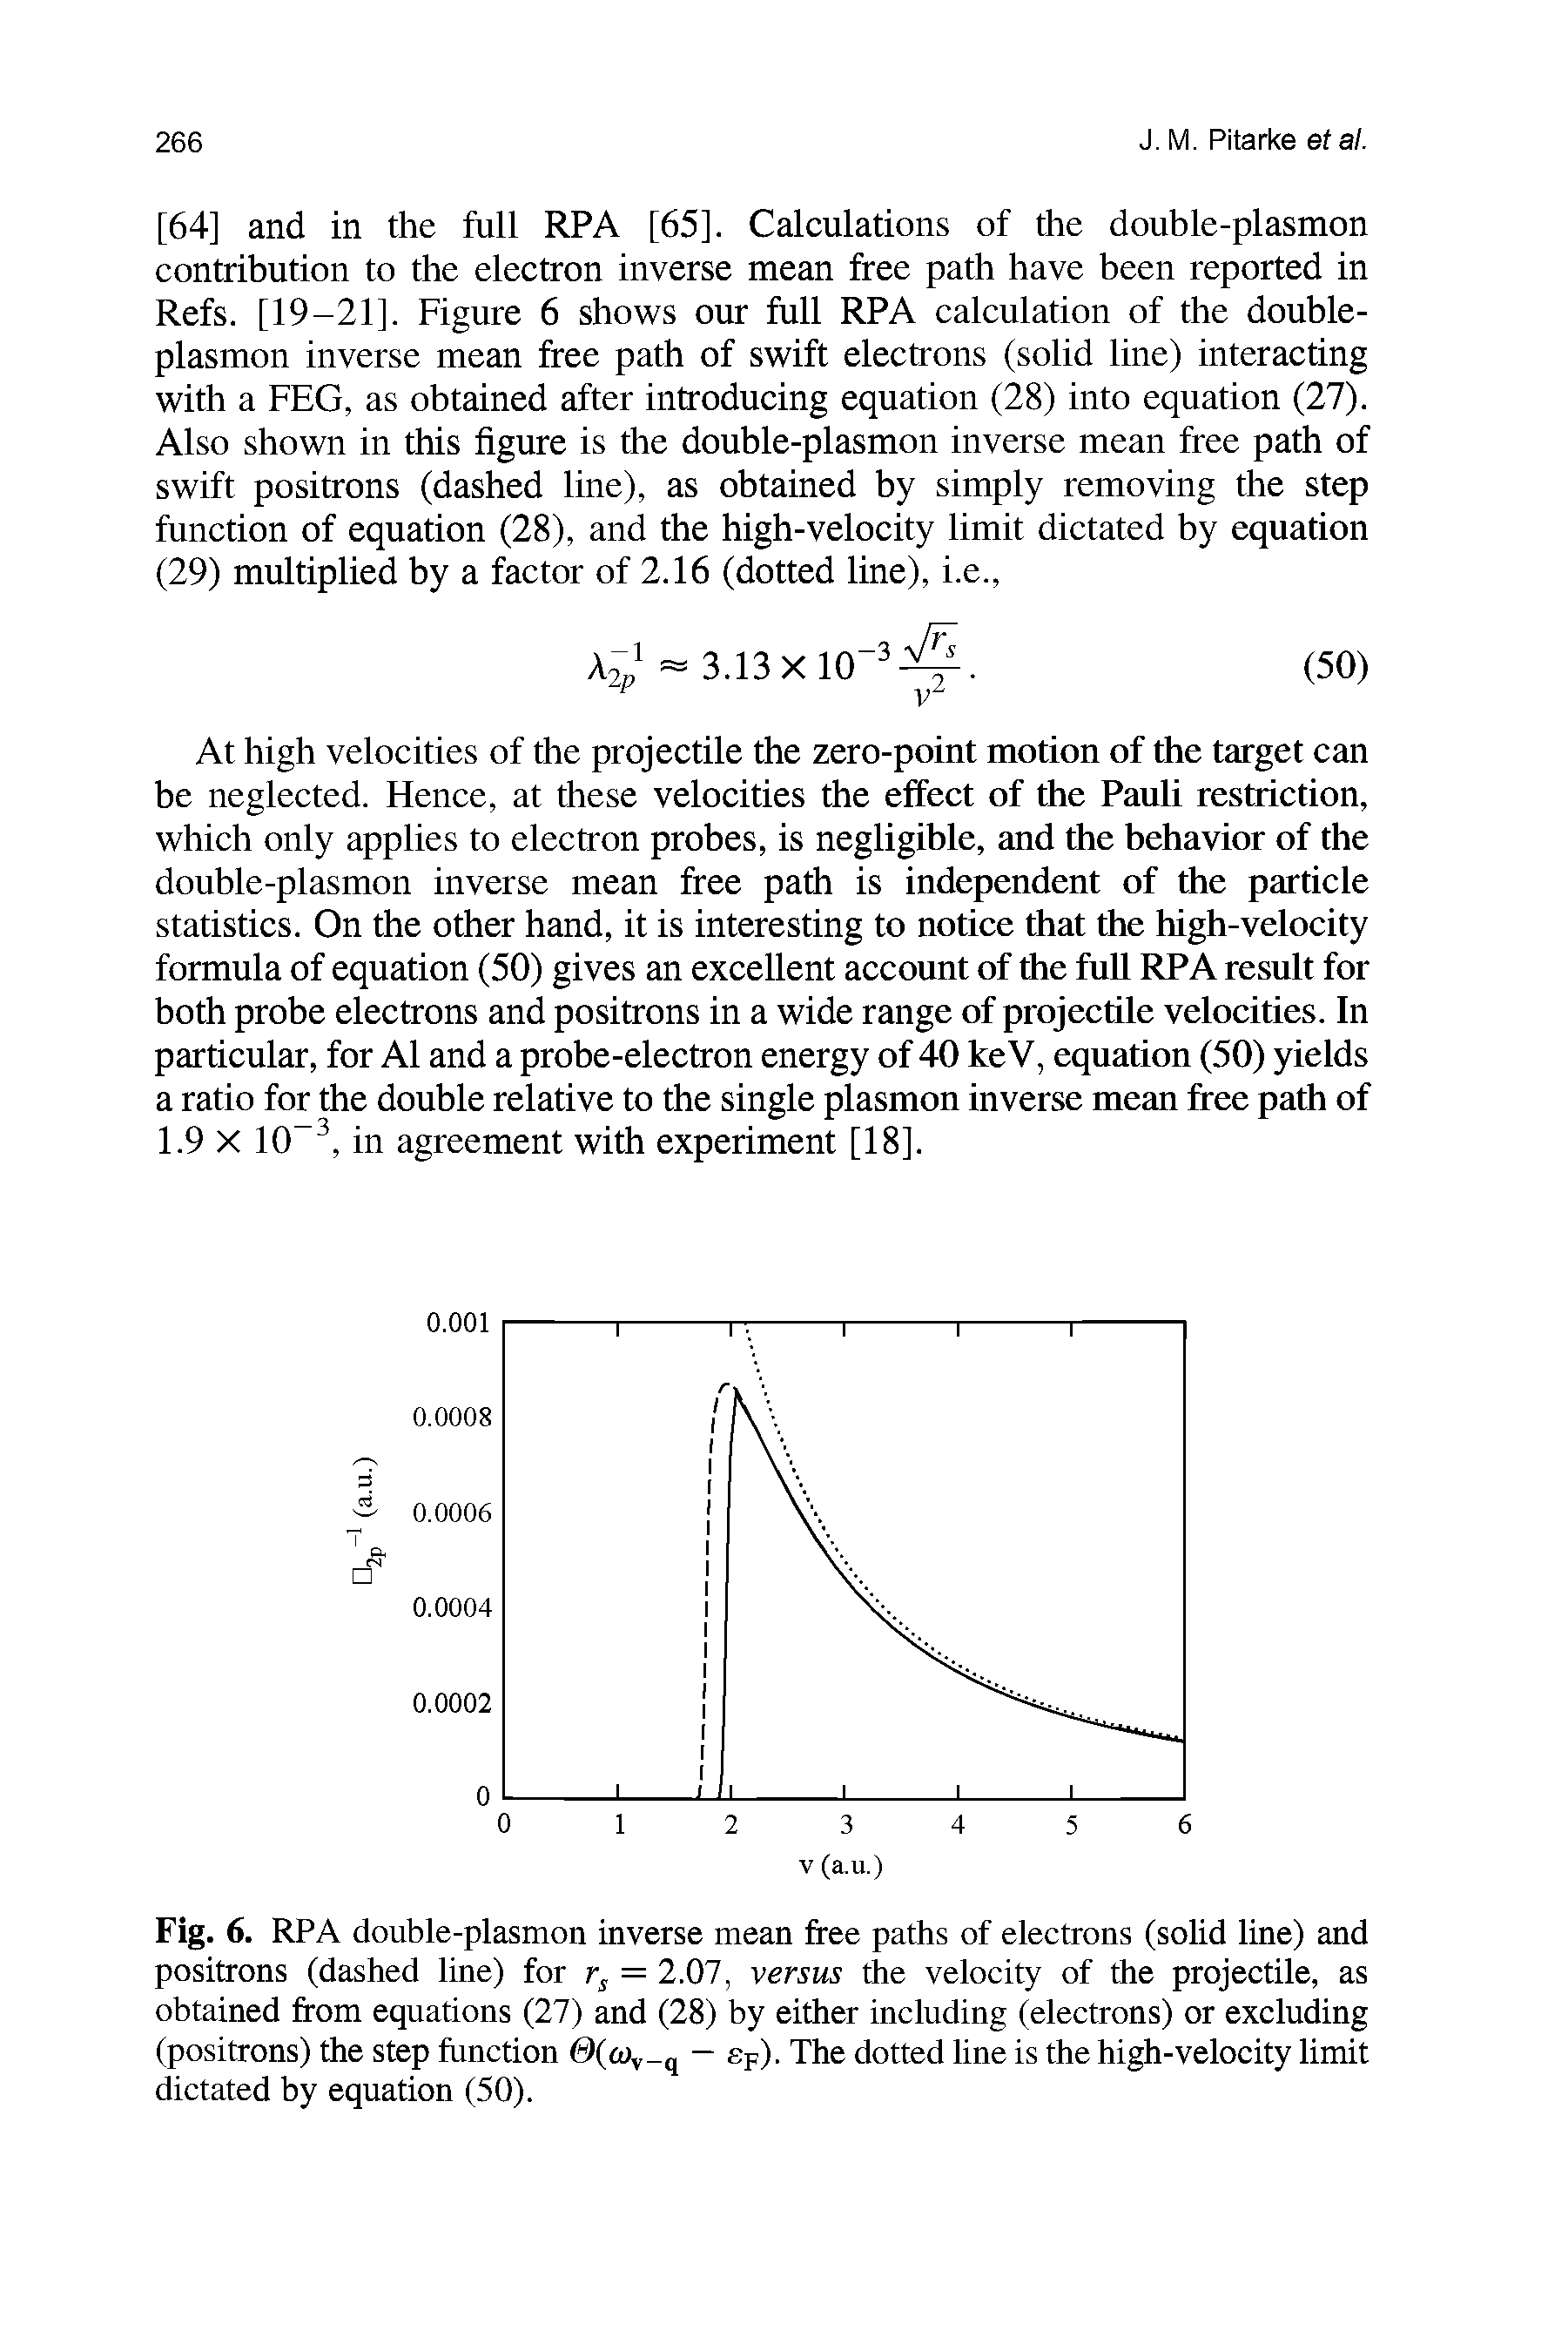 Fig. 6. RPA double-plasmon inverse mean free paths of electrons (solid line) and positrons (dashed line) for = 2.07, versus the velocity of the projectile, as obtained from equations (27) and (28) by either including (electrons) or excluding (positrons) the step function ((Wy q — sp). The dotted line is the high-velocity limit dictated by equation (50).